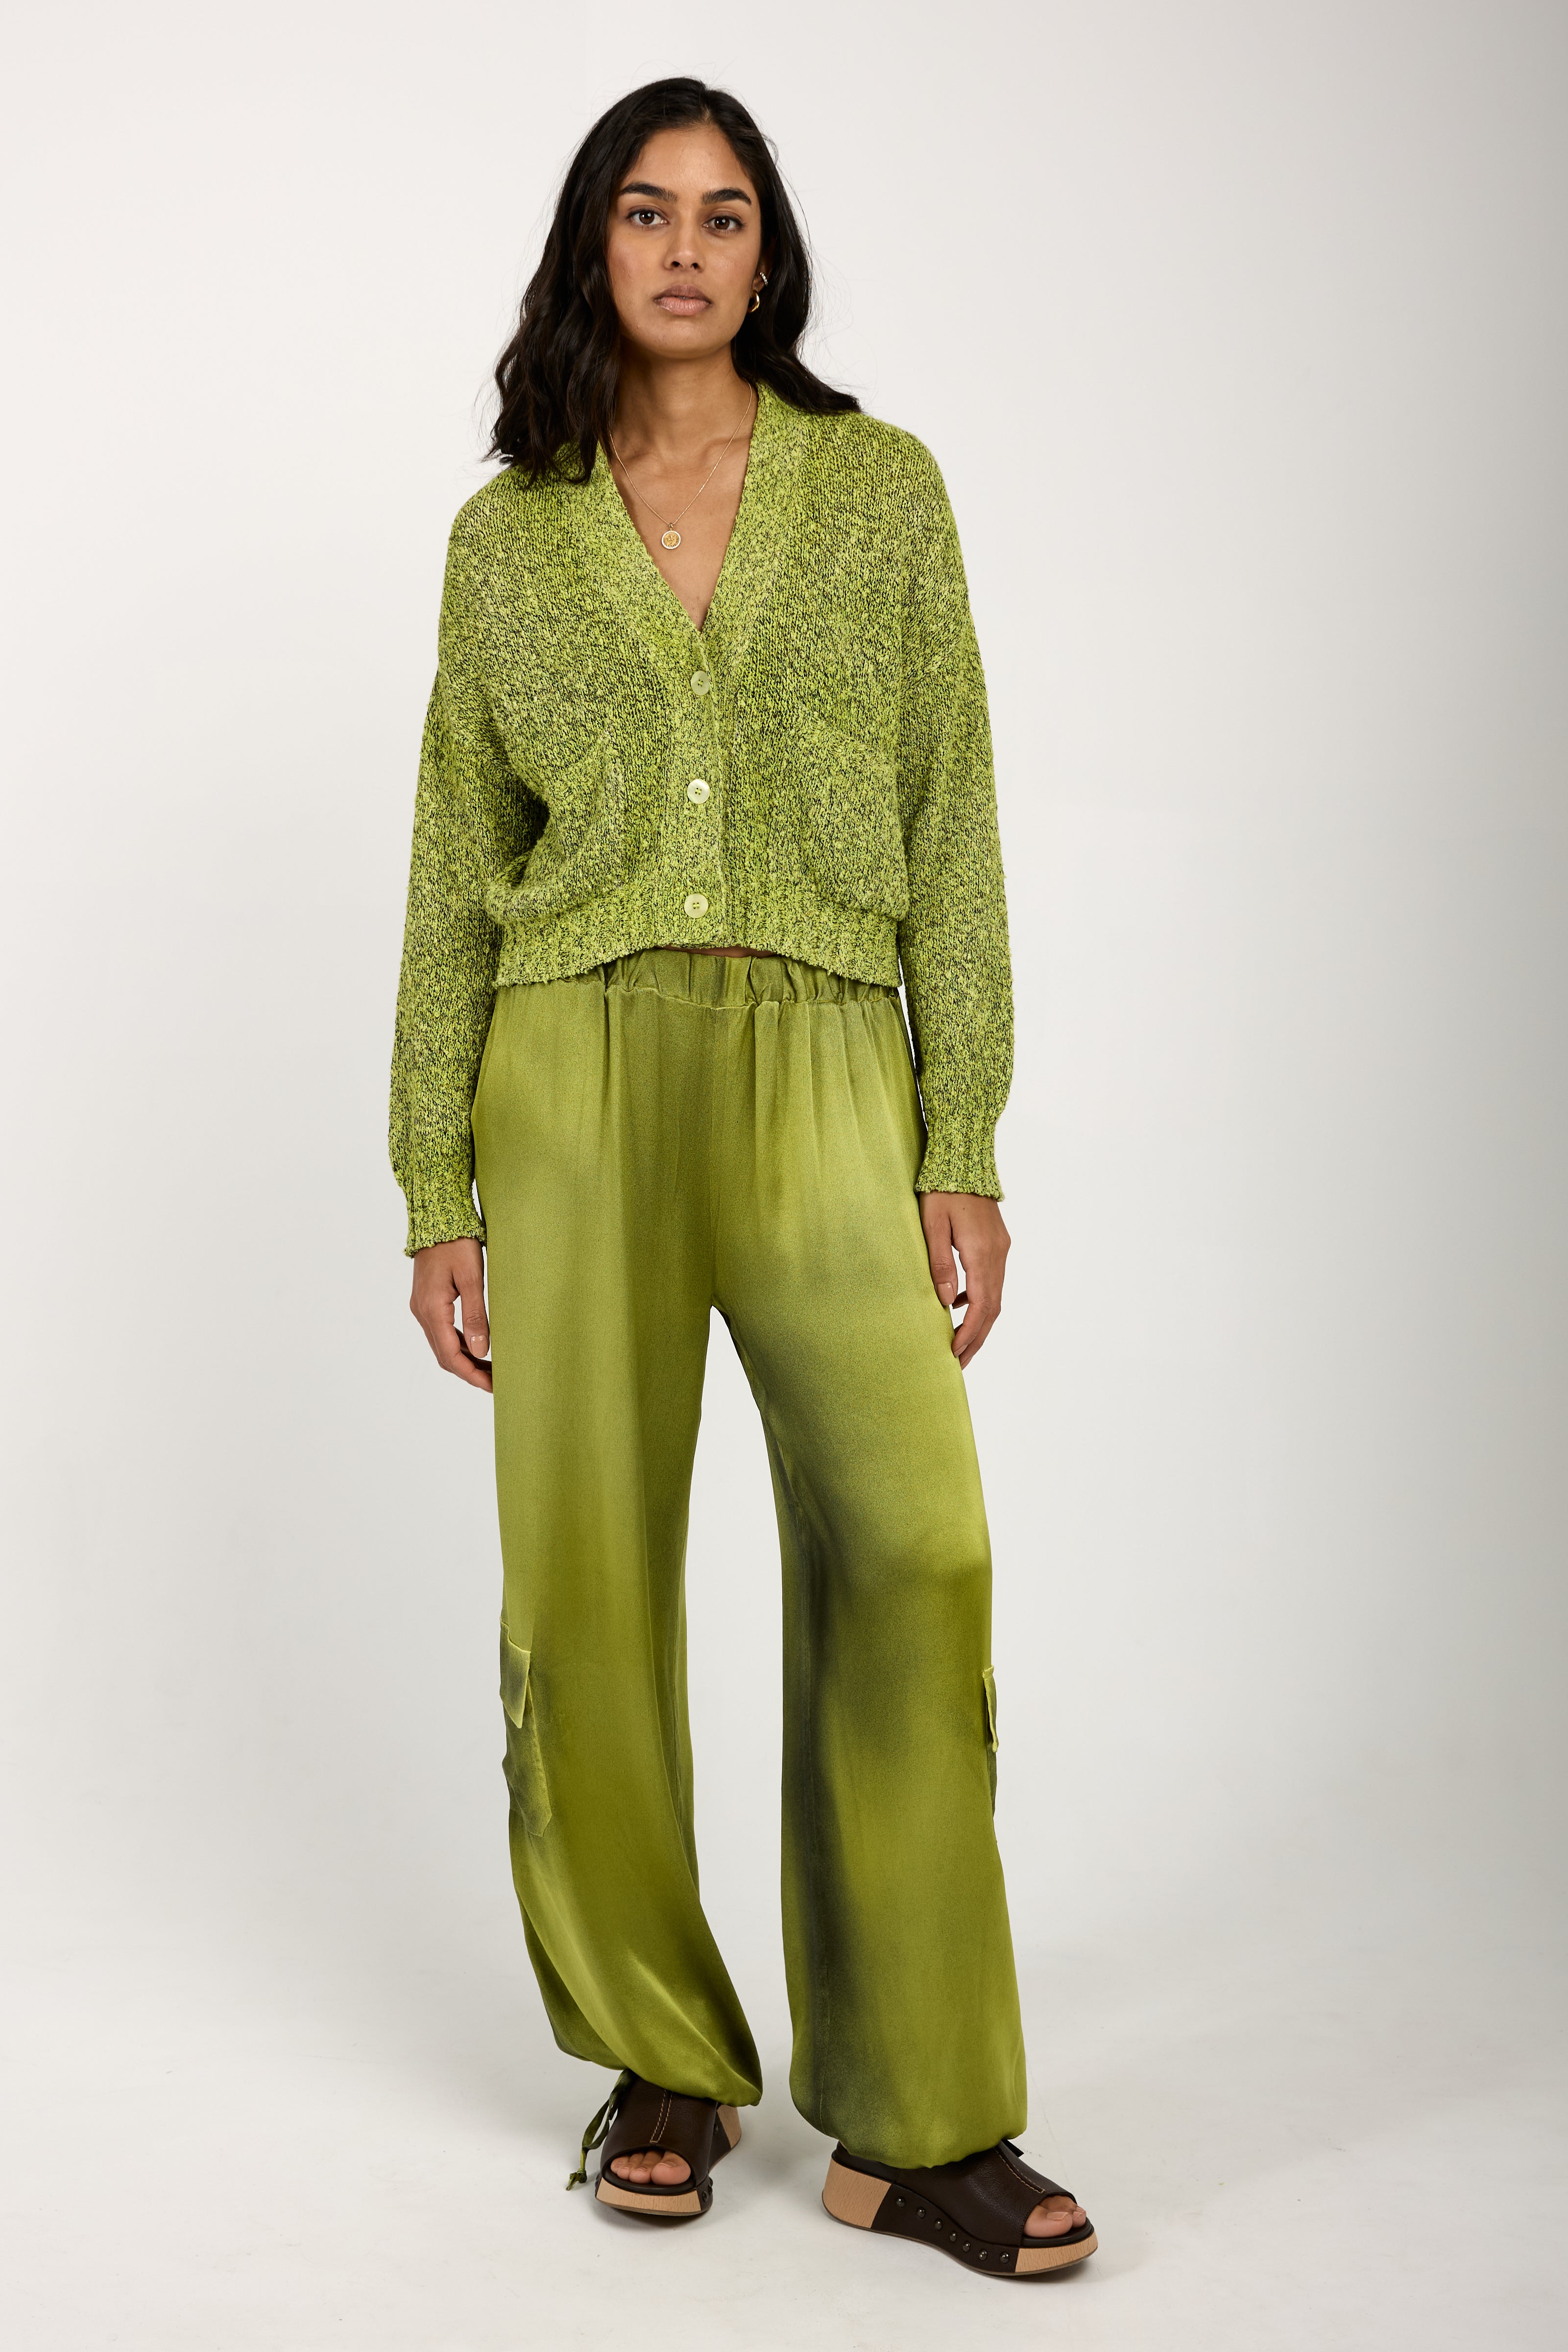 Mouliné Boxy Cotton Cardigan in Lime